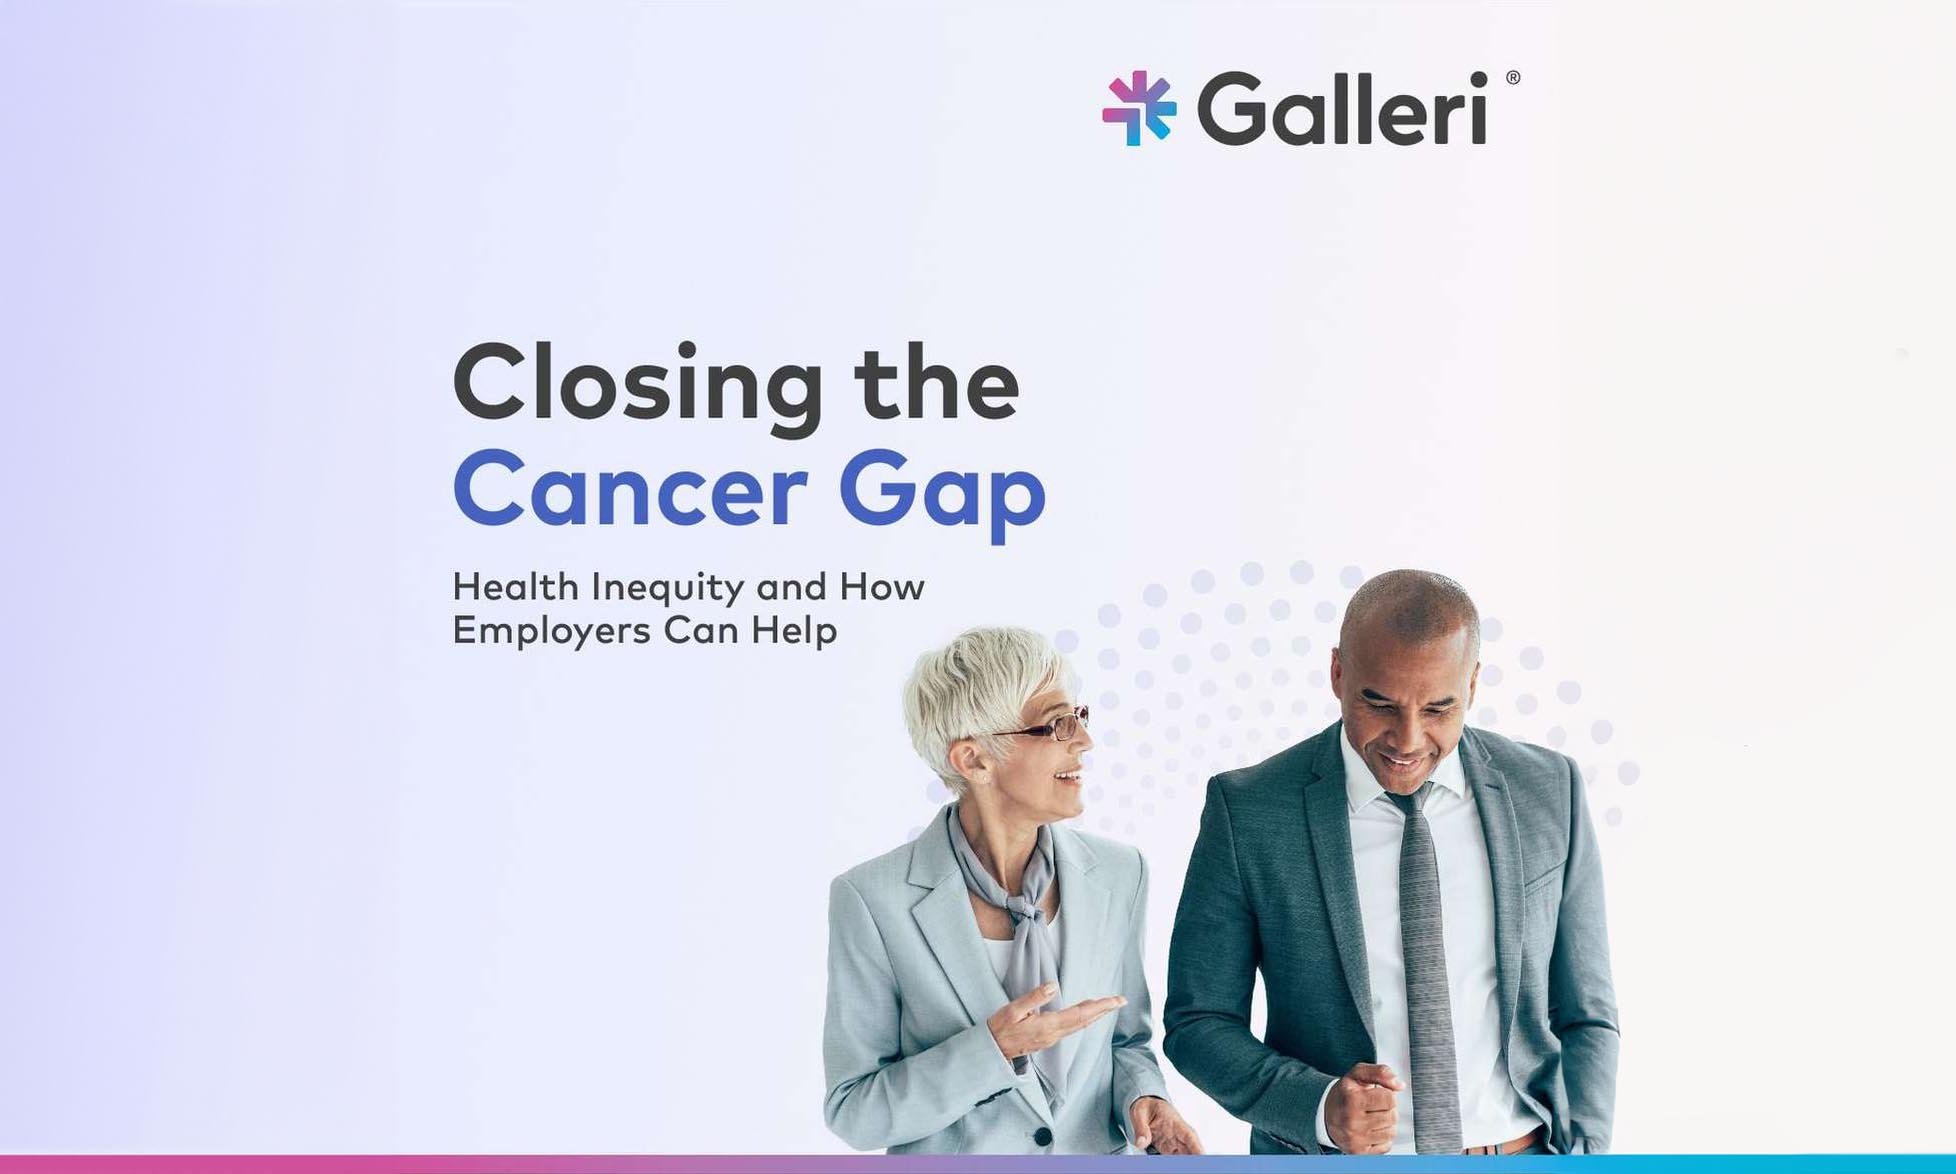 Empowering Your Workforce: Prioritizing Health Equity in Cancer Prevention